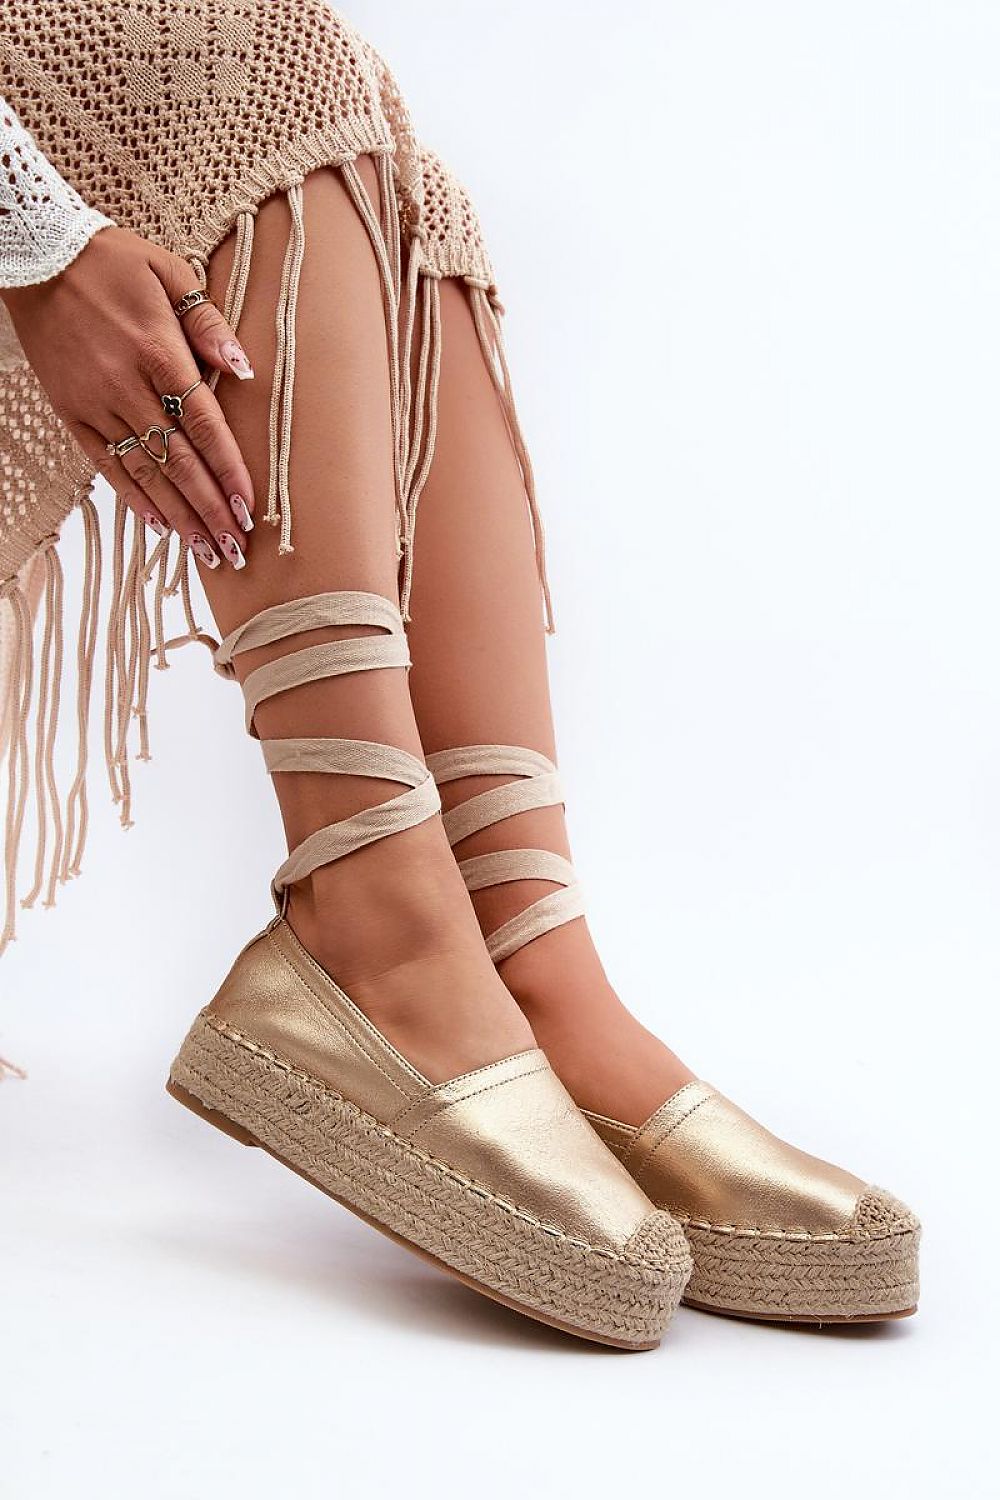 Women's Step in Style Gold Espadrille Platform Sandals with Lace-up Design